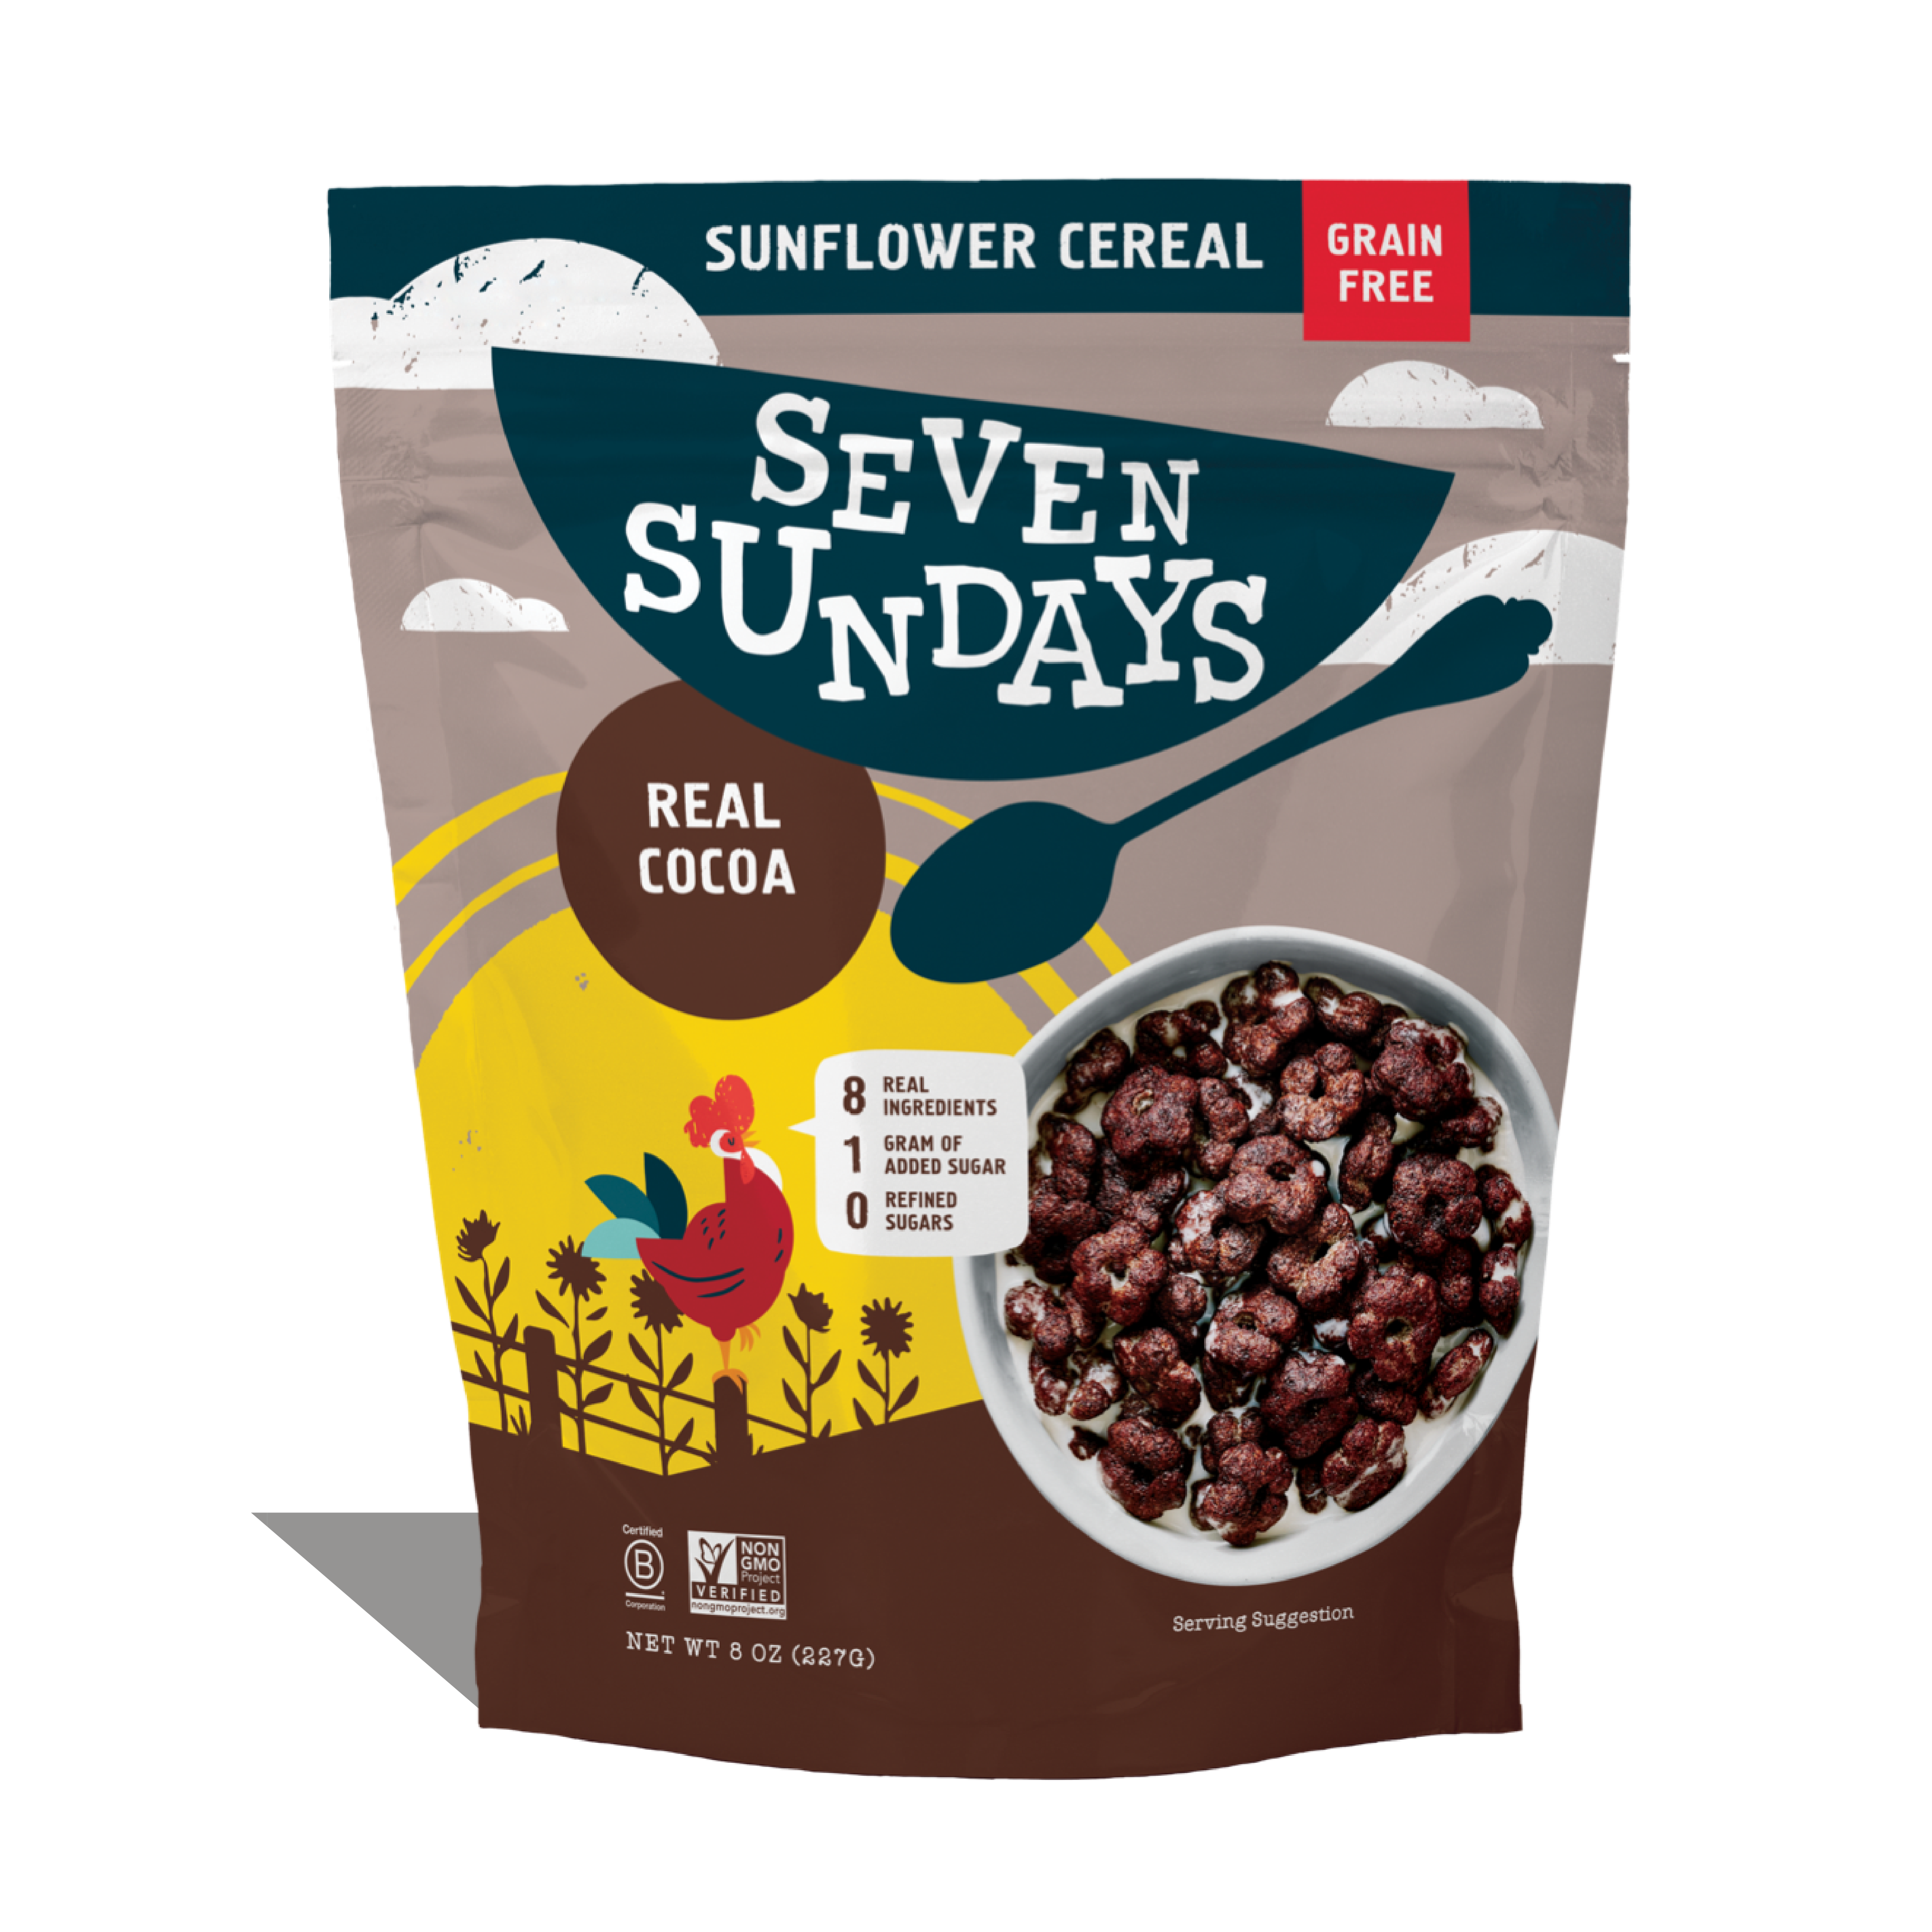 Real Cocoa Sunflower Cereal